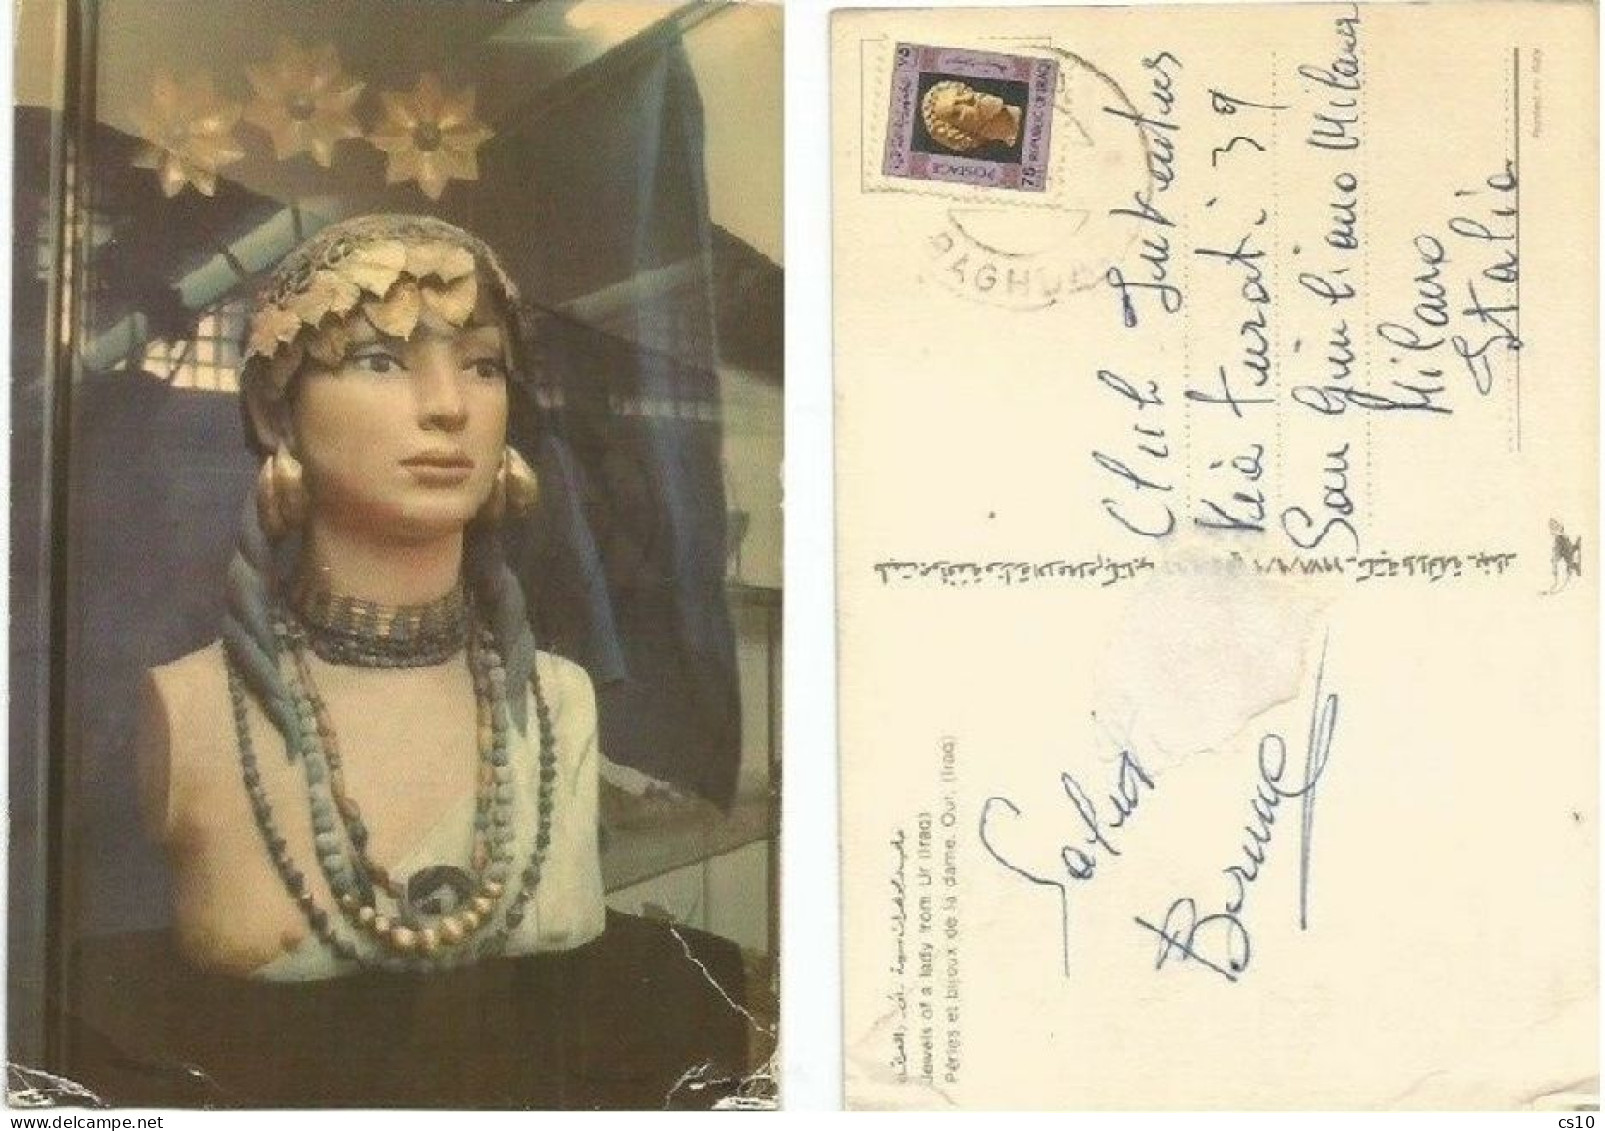 Iraq Irak Jewels Of A Lady From UR - Pcard Used Late 70's To Italy - Irak